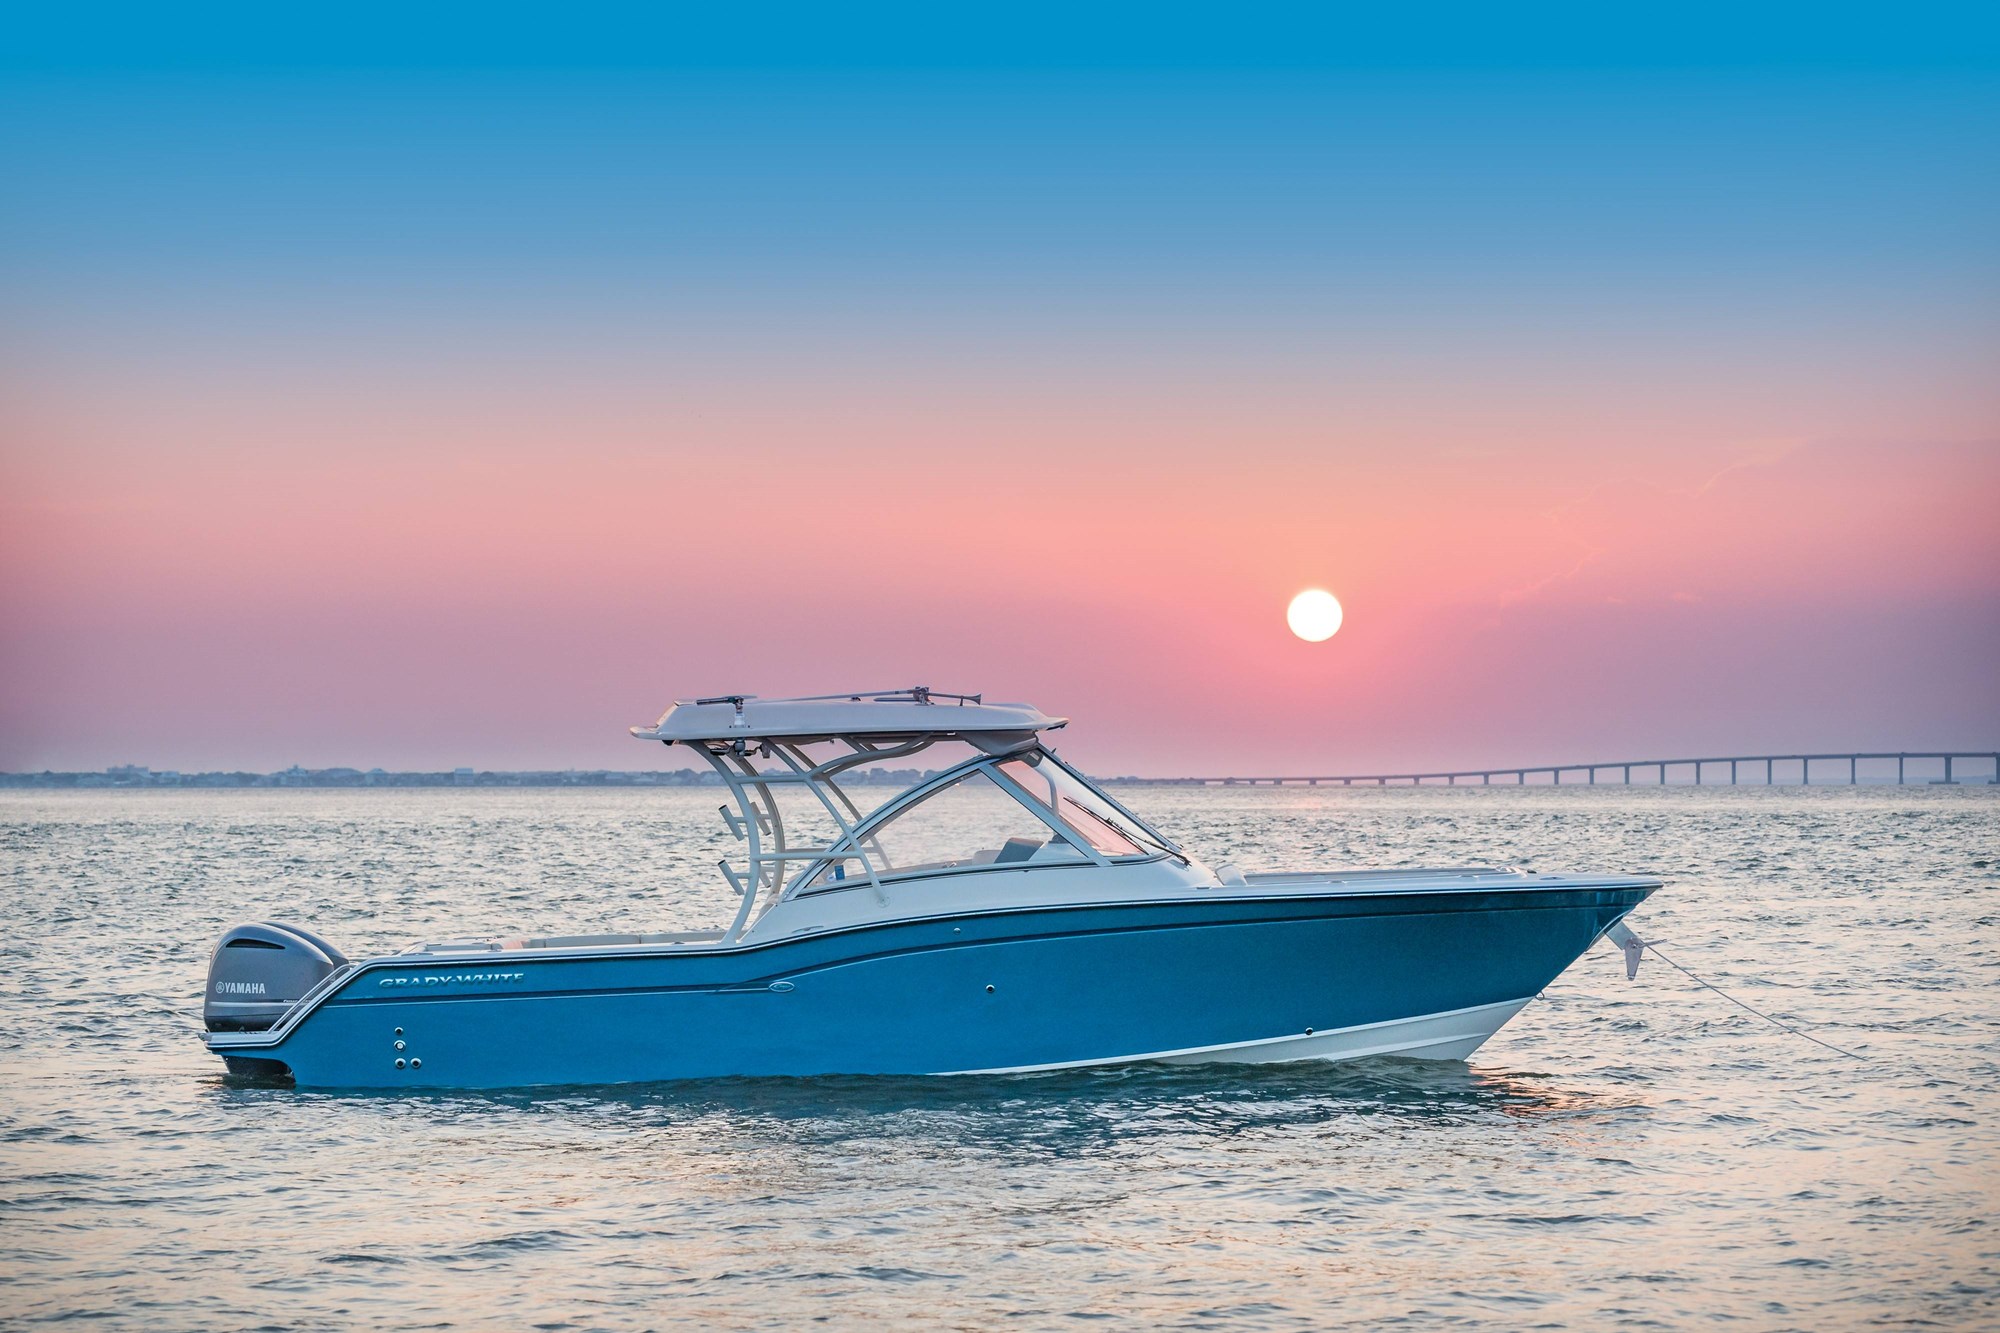 The perfect day begins with this beautiful Freedom 325.